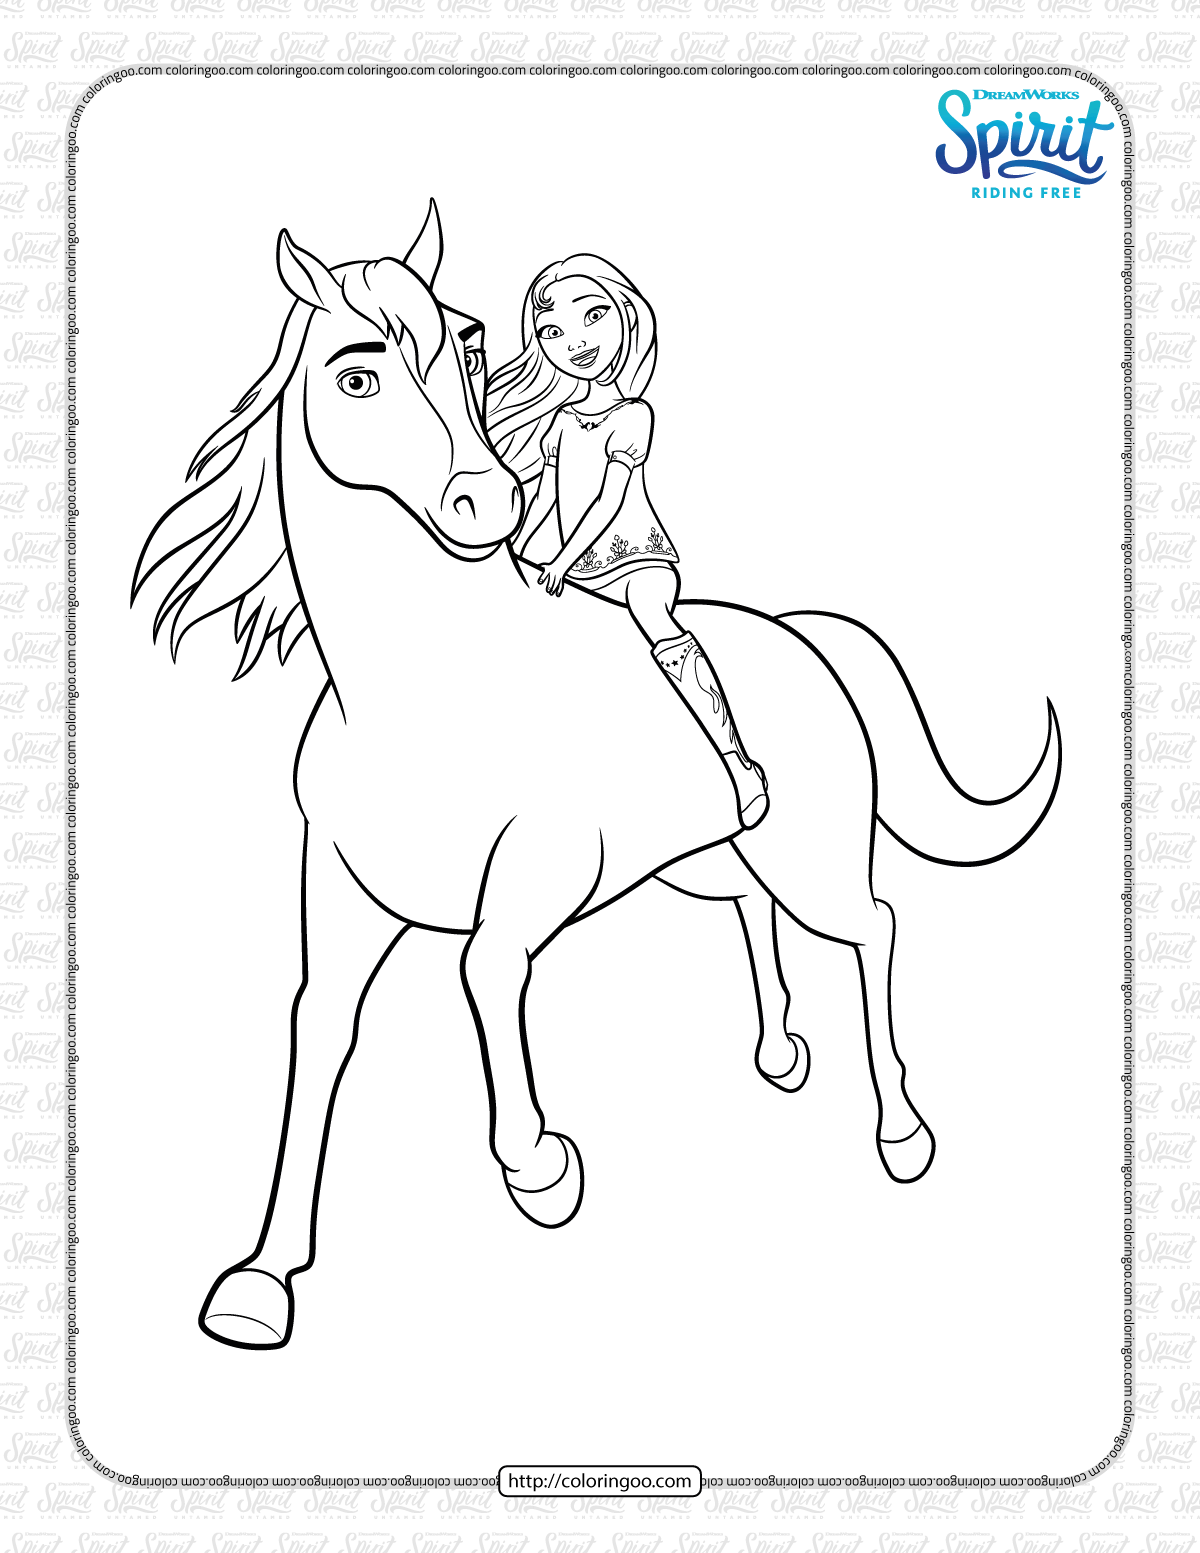 spirit and lucky pdf coloring pages